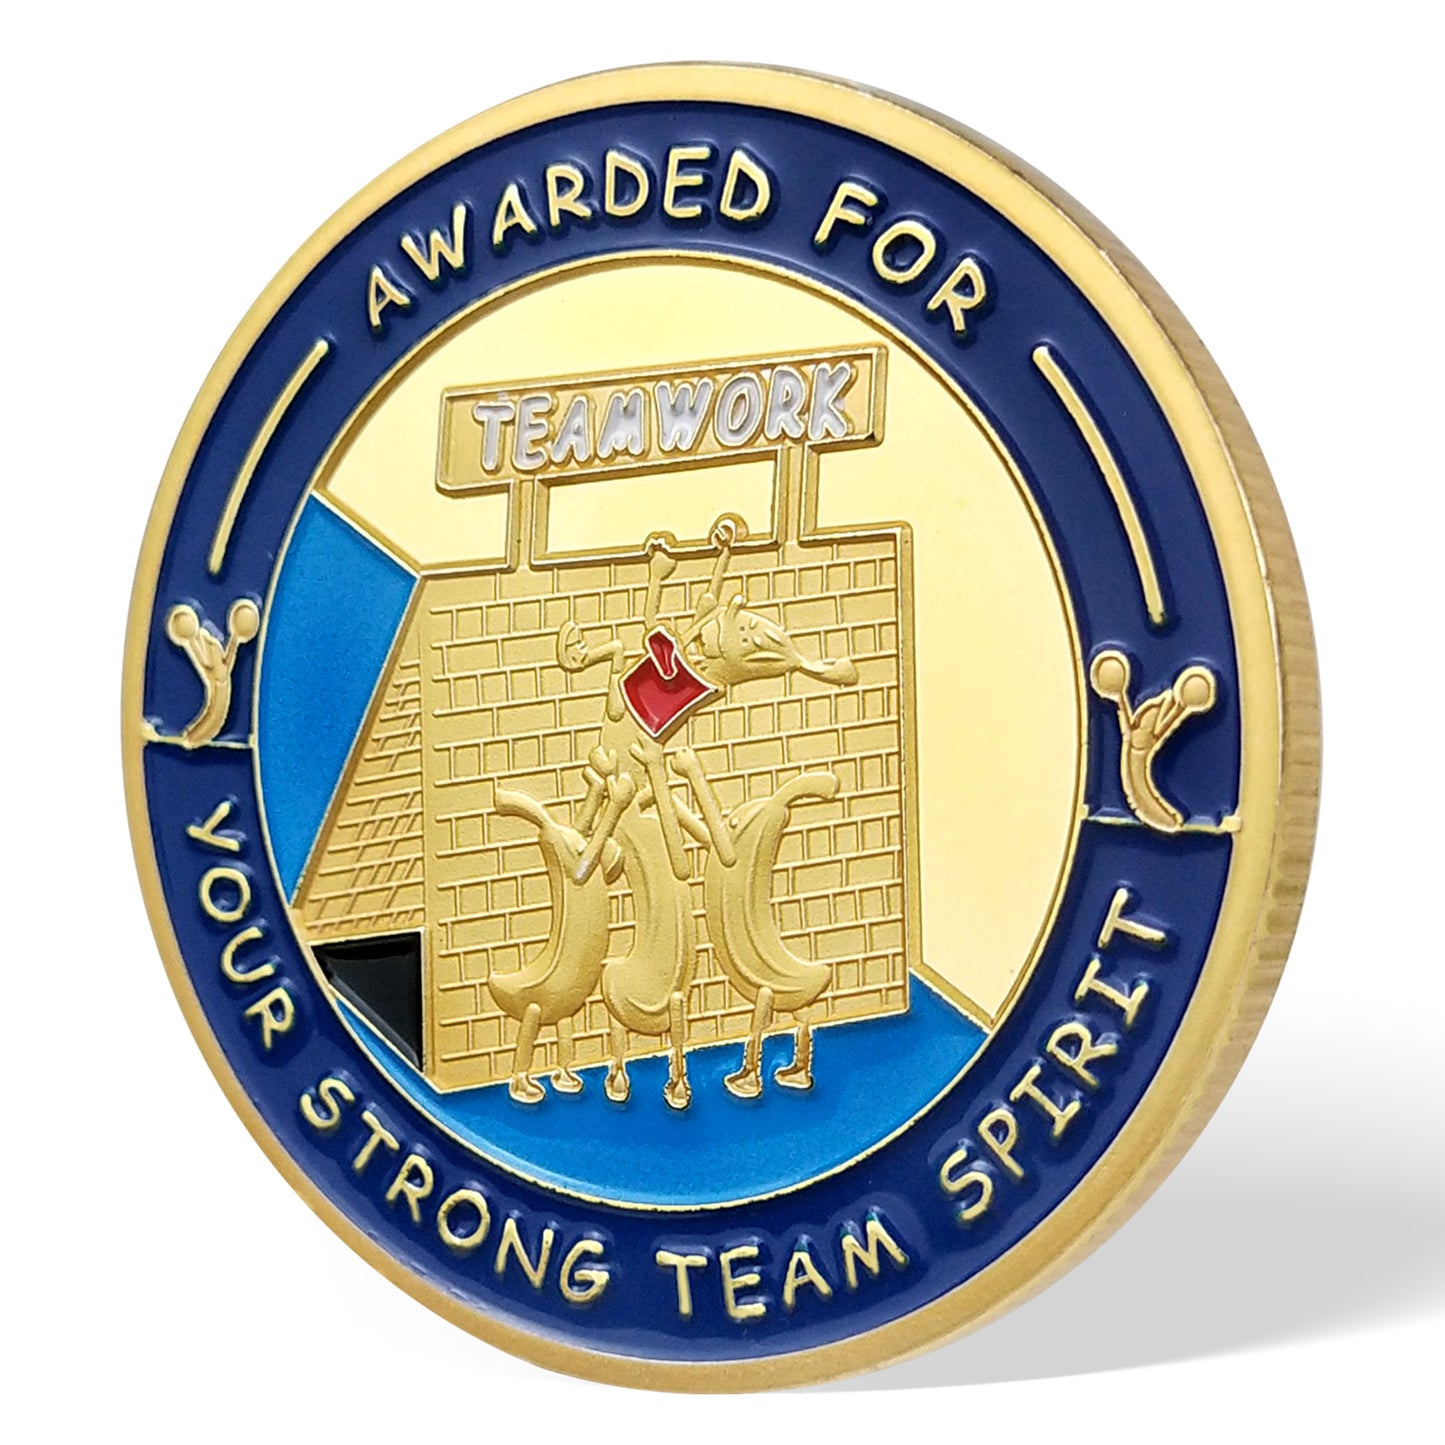 Encouragement Challenge Coin-Employee Appreciation Gifts Inspirational Thank You Coin for Students and Cowokers-Team Work